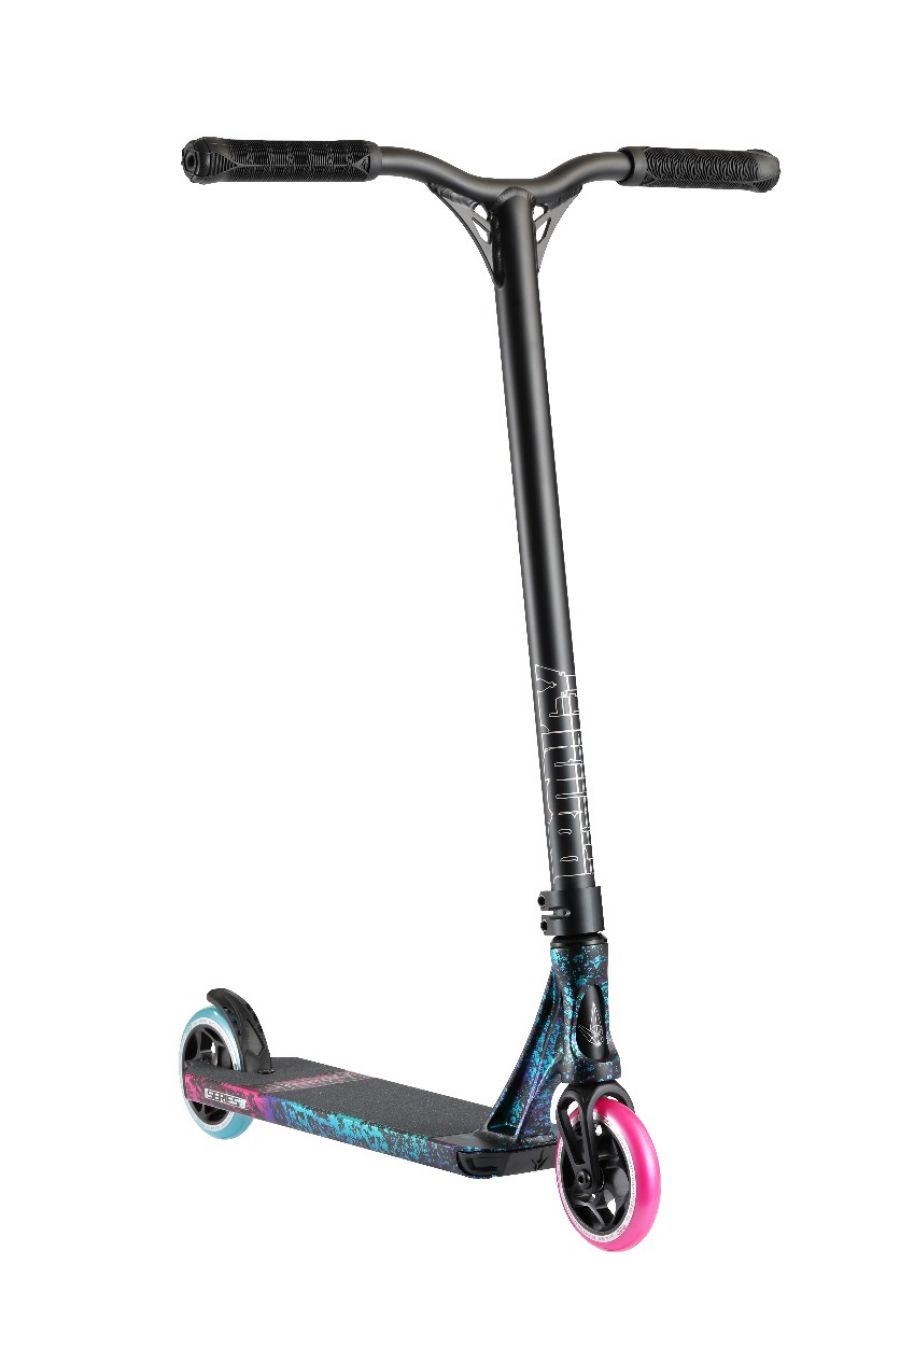 Envy Prodigy S8 Complete Scooter - Dusk